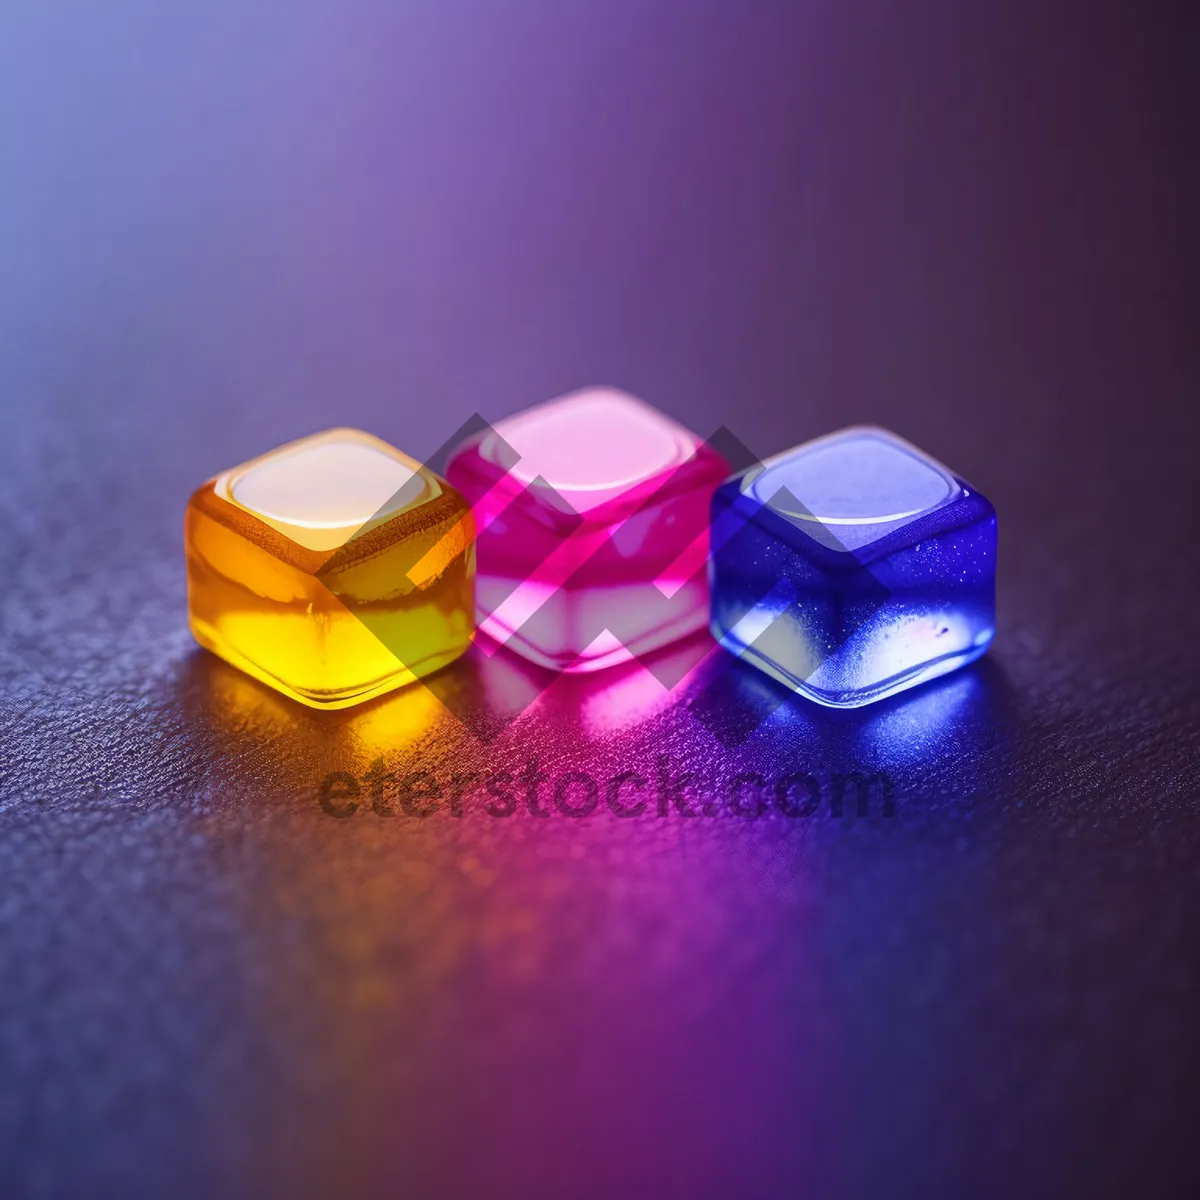 Picture of Vibrant LED Colors Illuminating Brightly